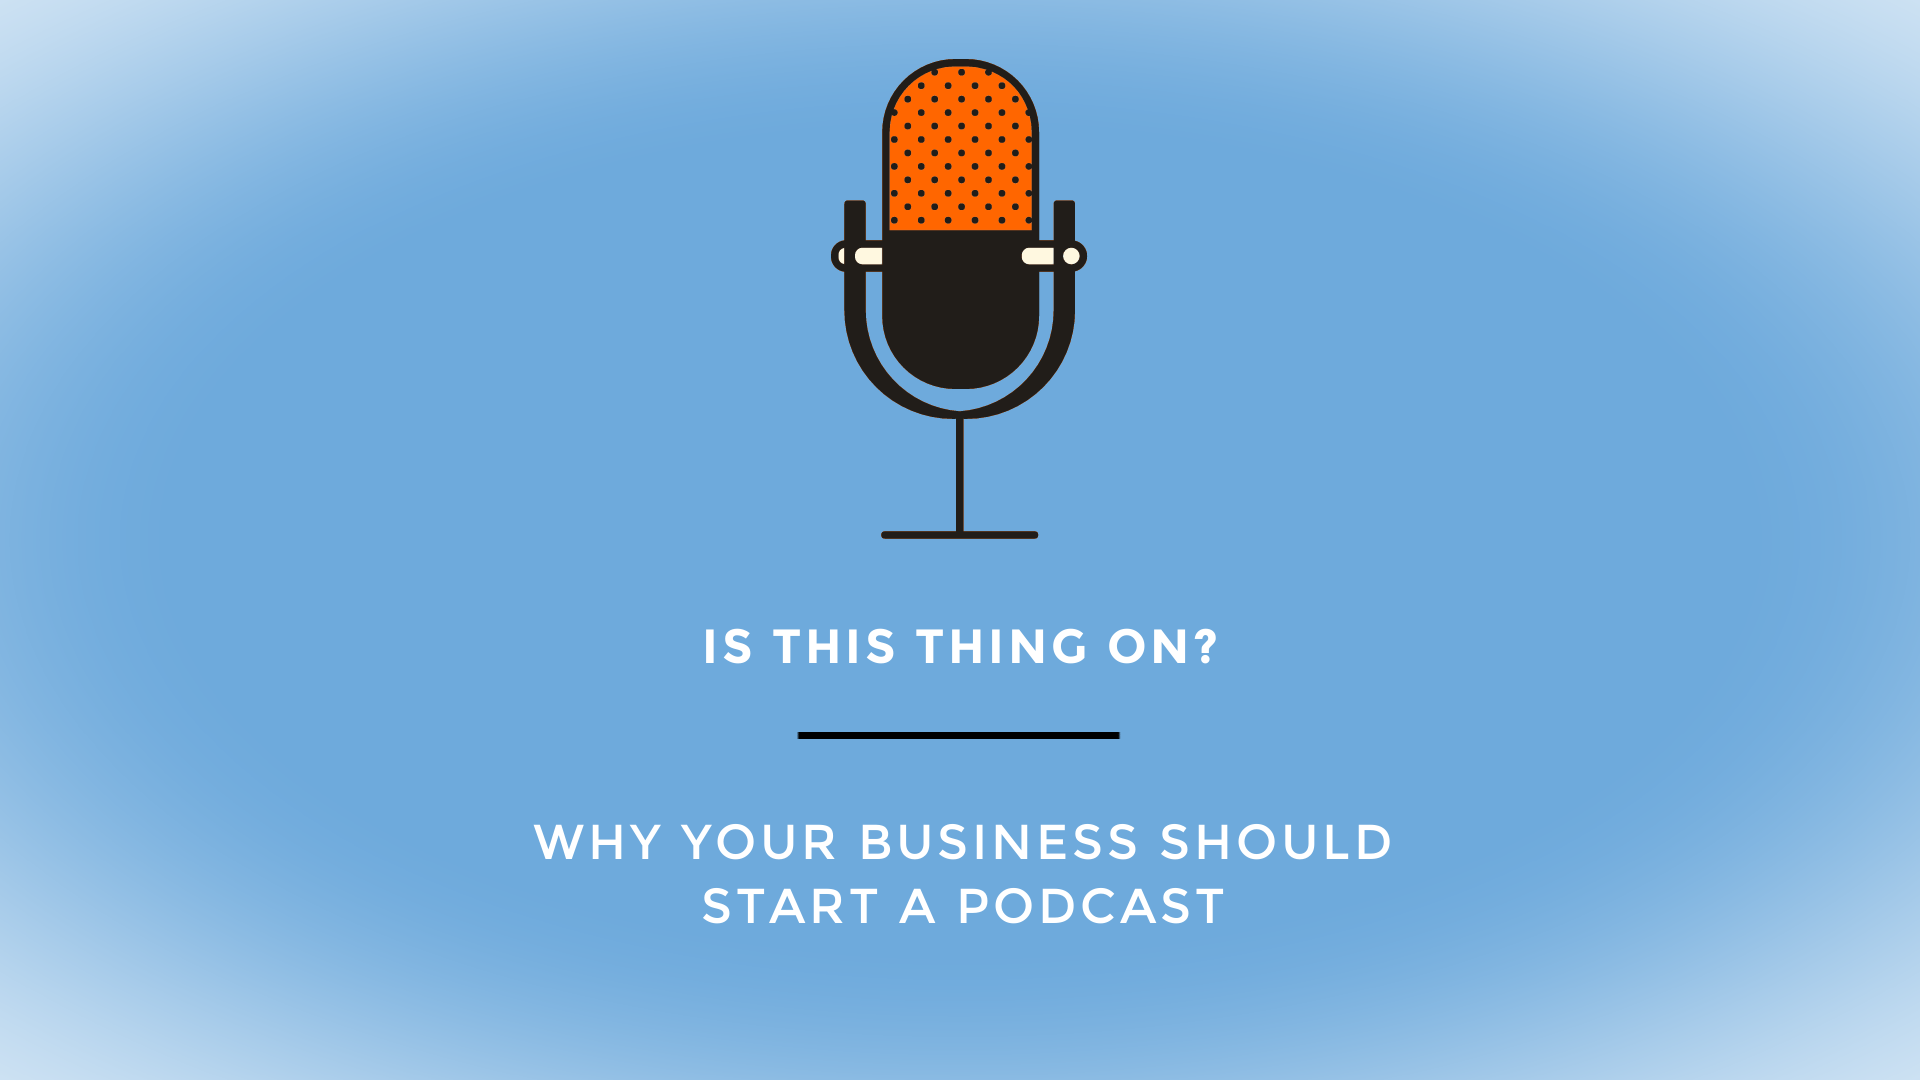 Why Your Business Should Start a Podcast